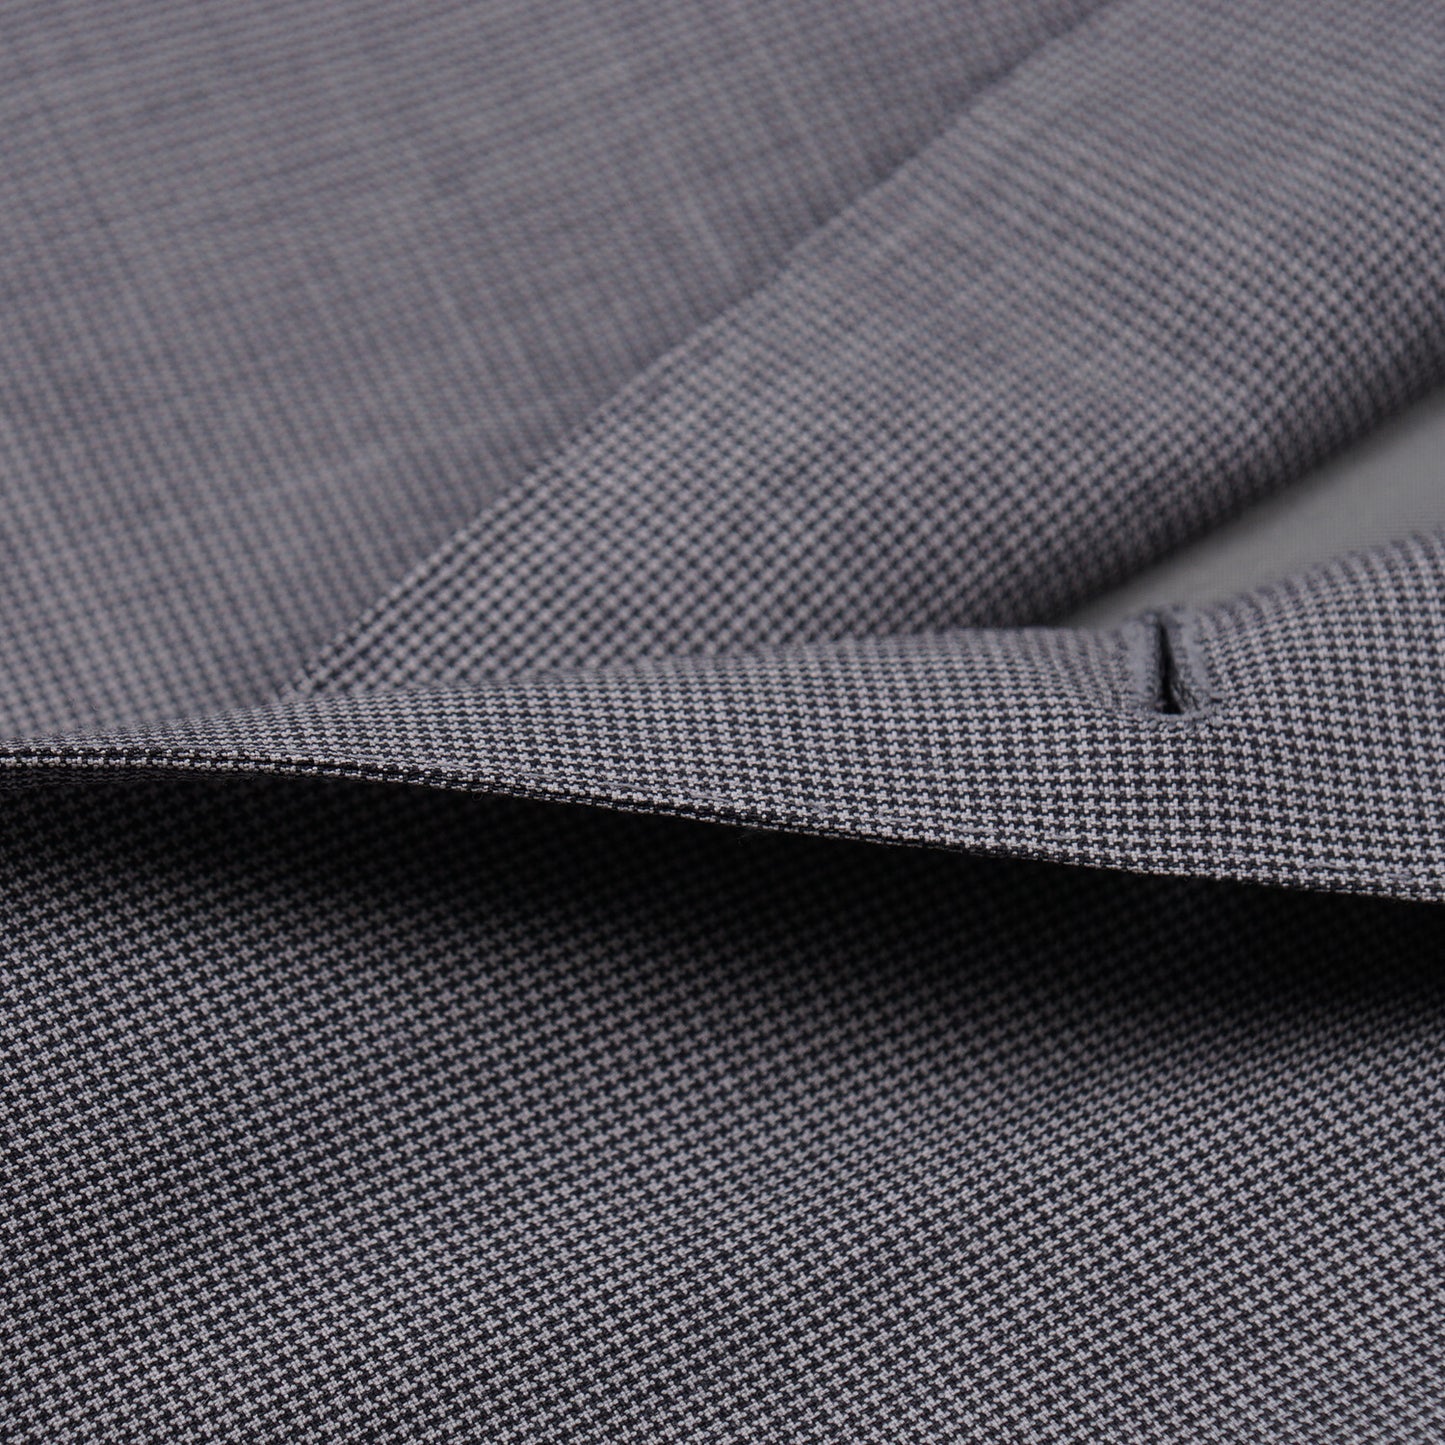 Kiton Houndstooth Check Super 180s Suit - Top Shelf Apparel